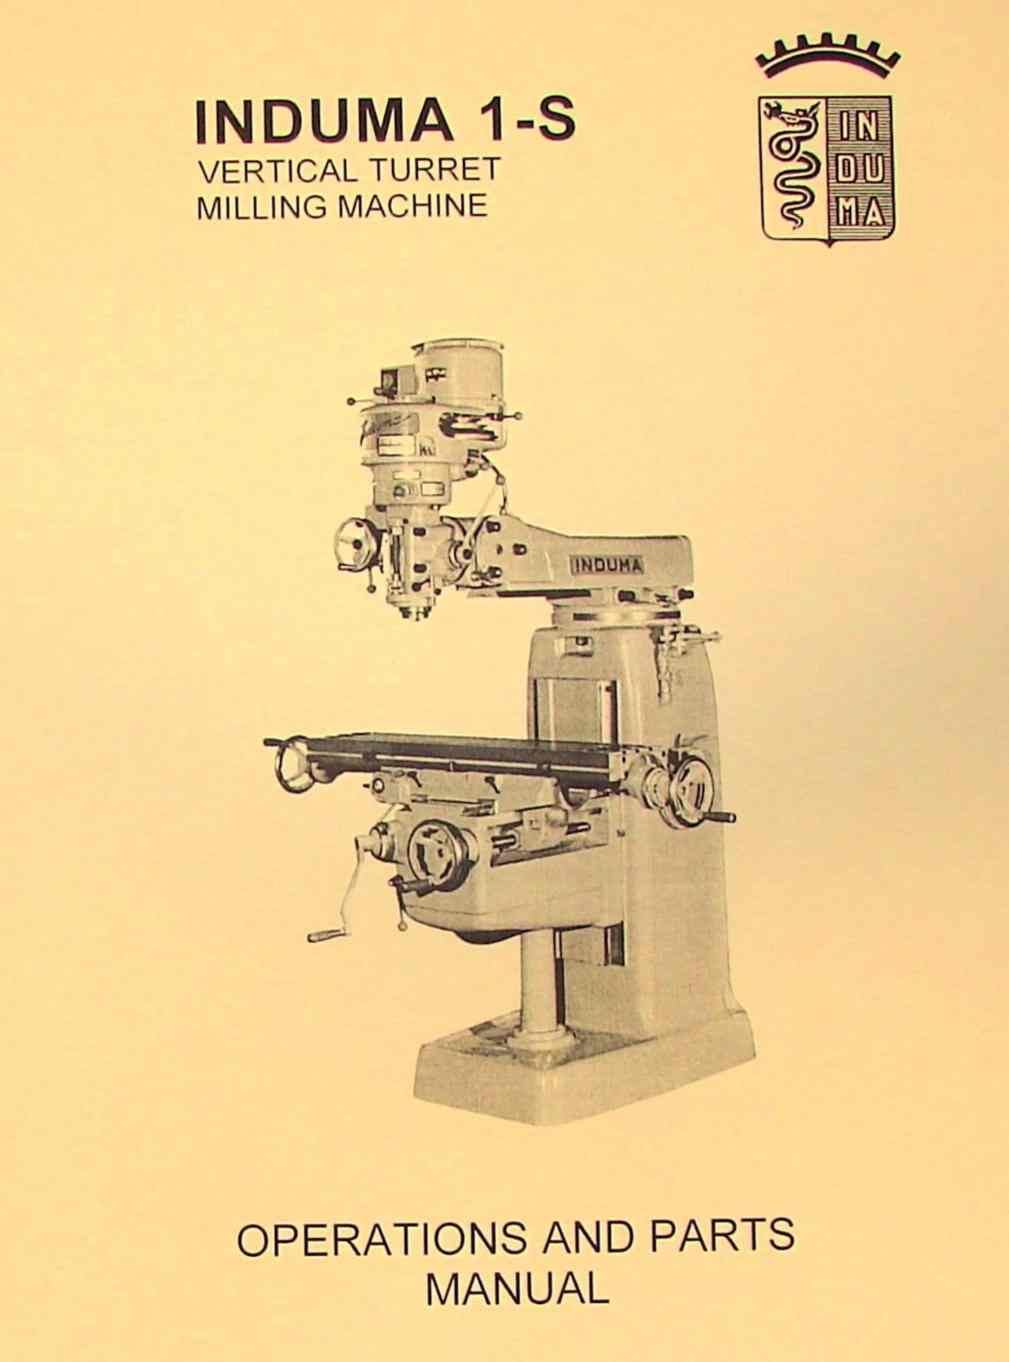 Rockwell Horizontal Milling Machine 21-120 Operator and Parts Manual  #1887 